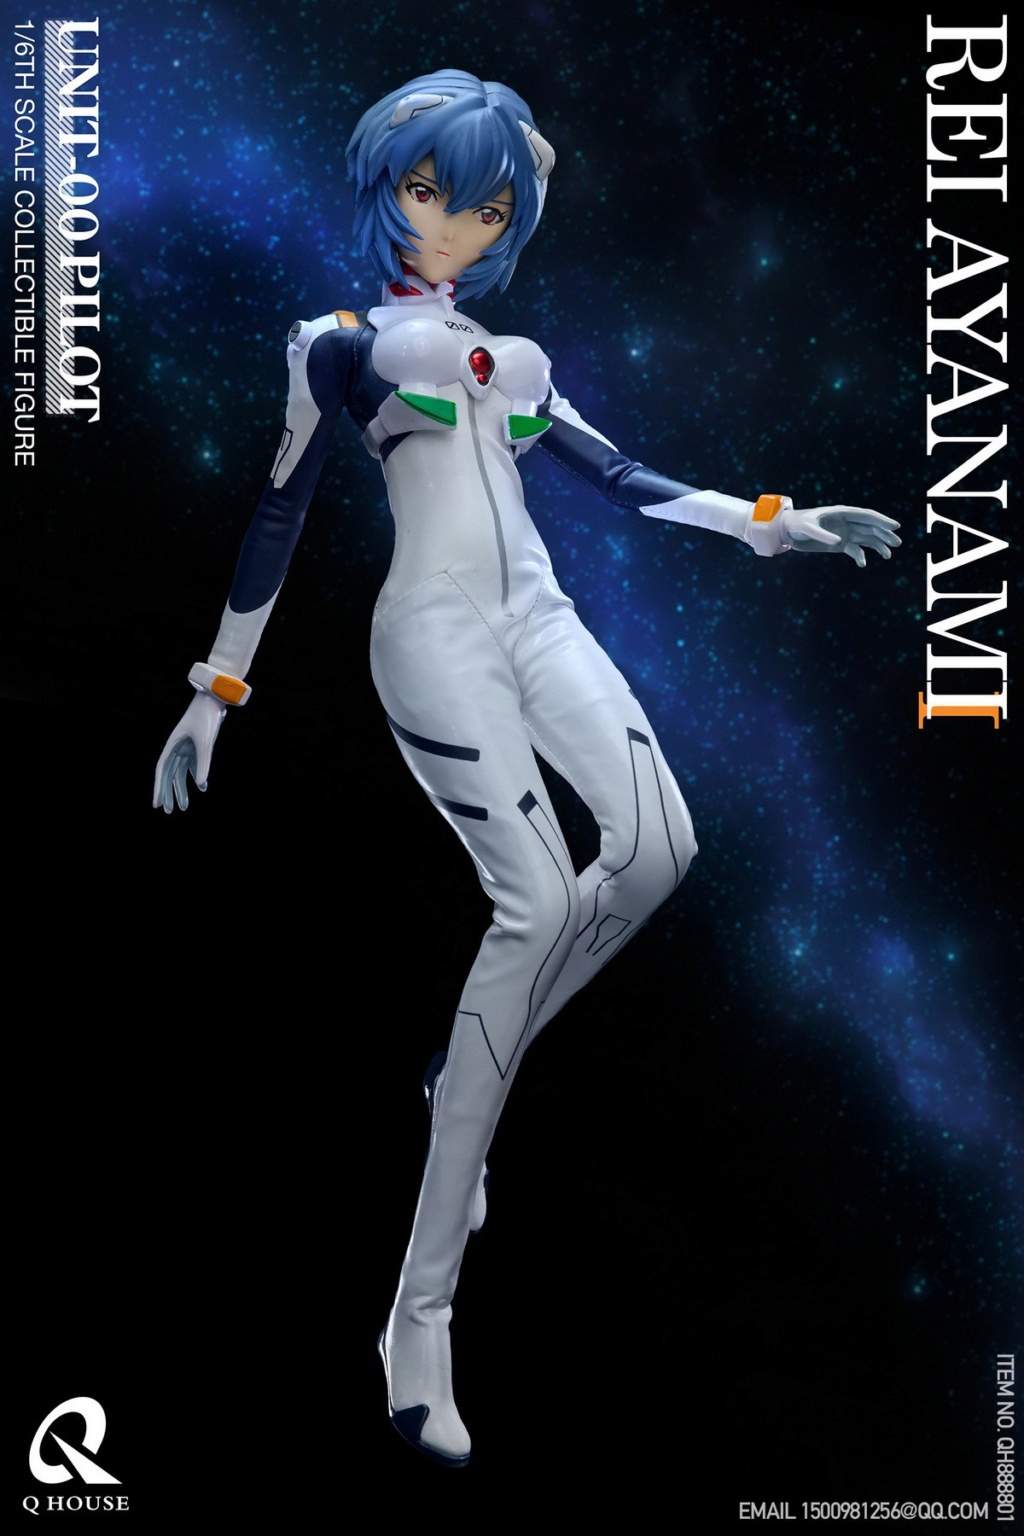 Anime - NEW PRODUCT: Q House: 1/6 Evangelion - Rei Ayanami  11143911